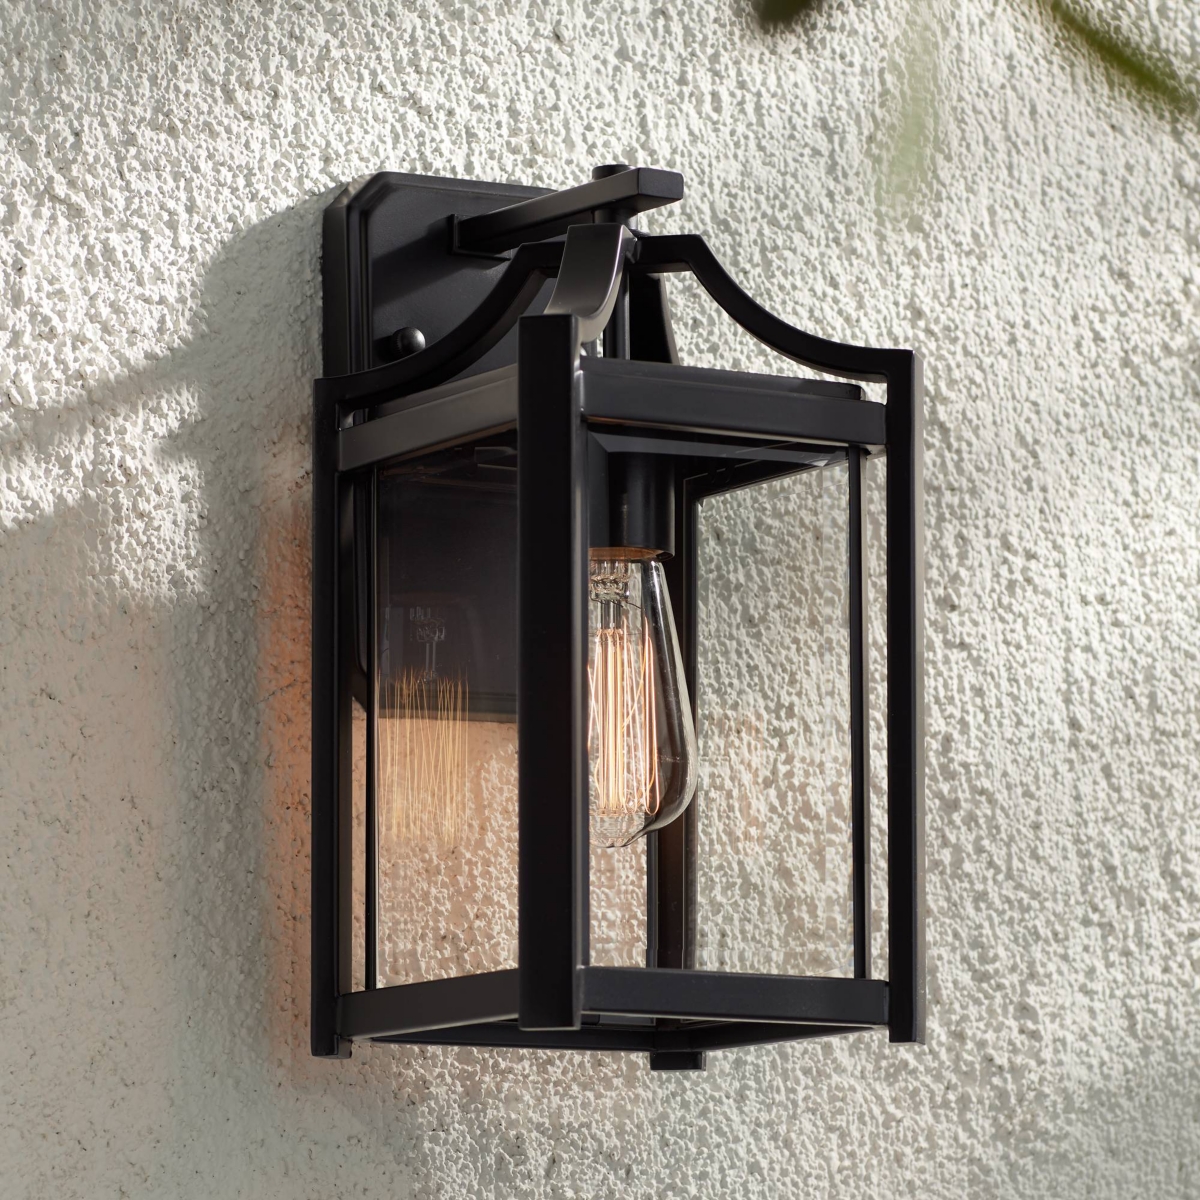 Rockford Farmhouse Rustic Outdoor Wall Light Fixture Black 12 1/2" Clear Beveled Glass Decor for Exterior House Porch Patio Outside Deck Garage Yard F